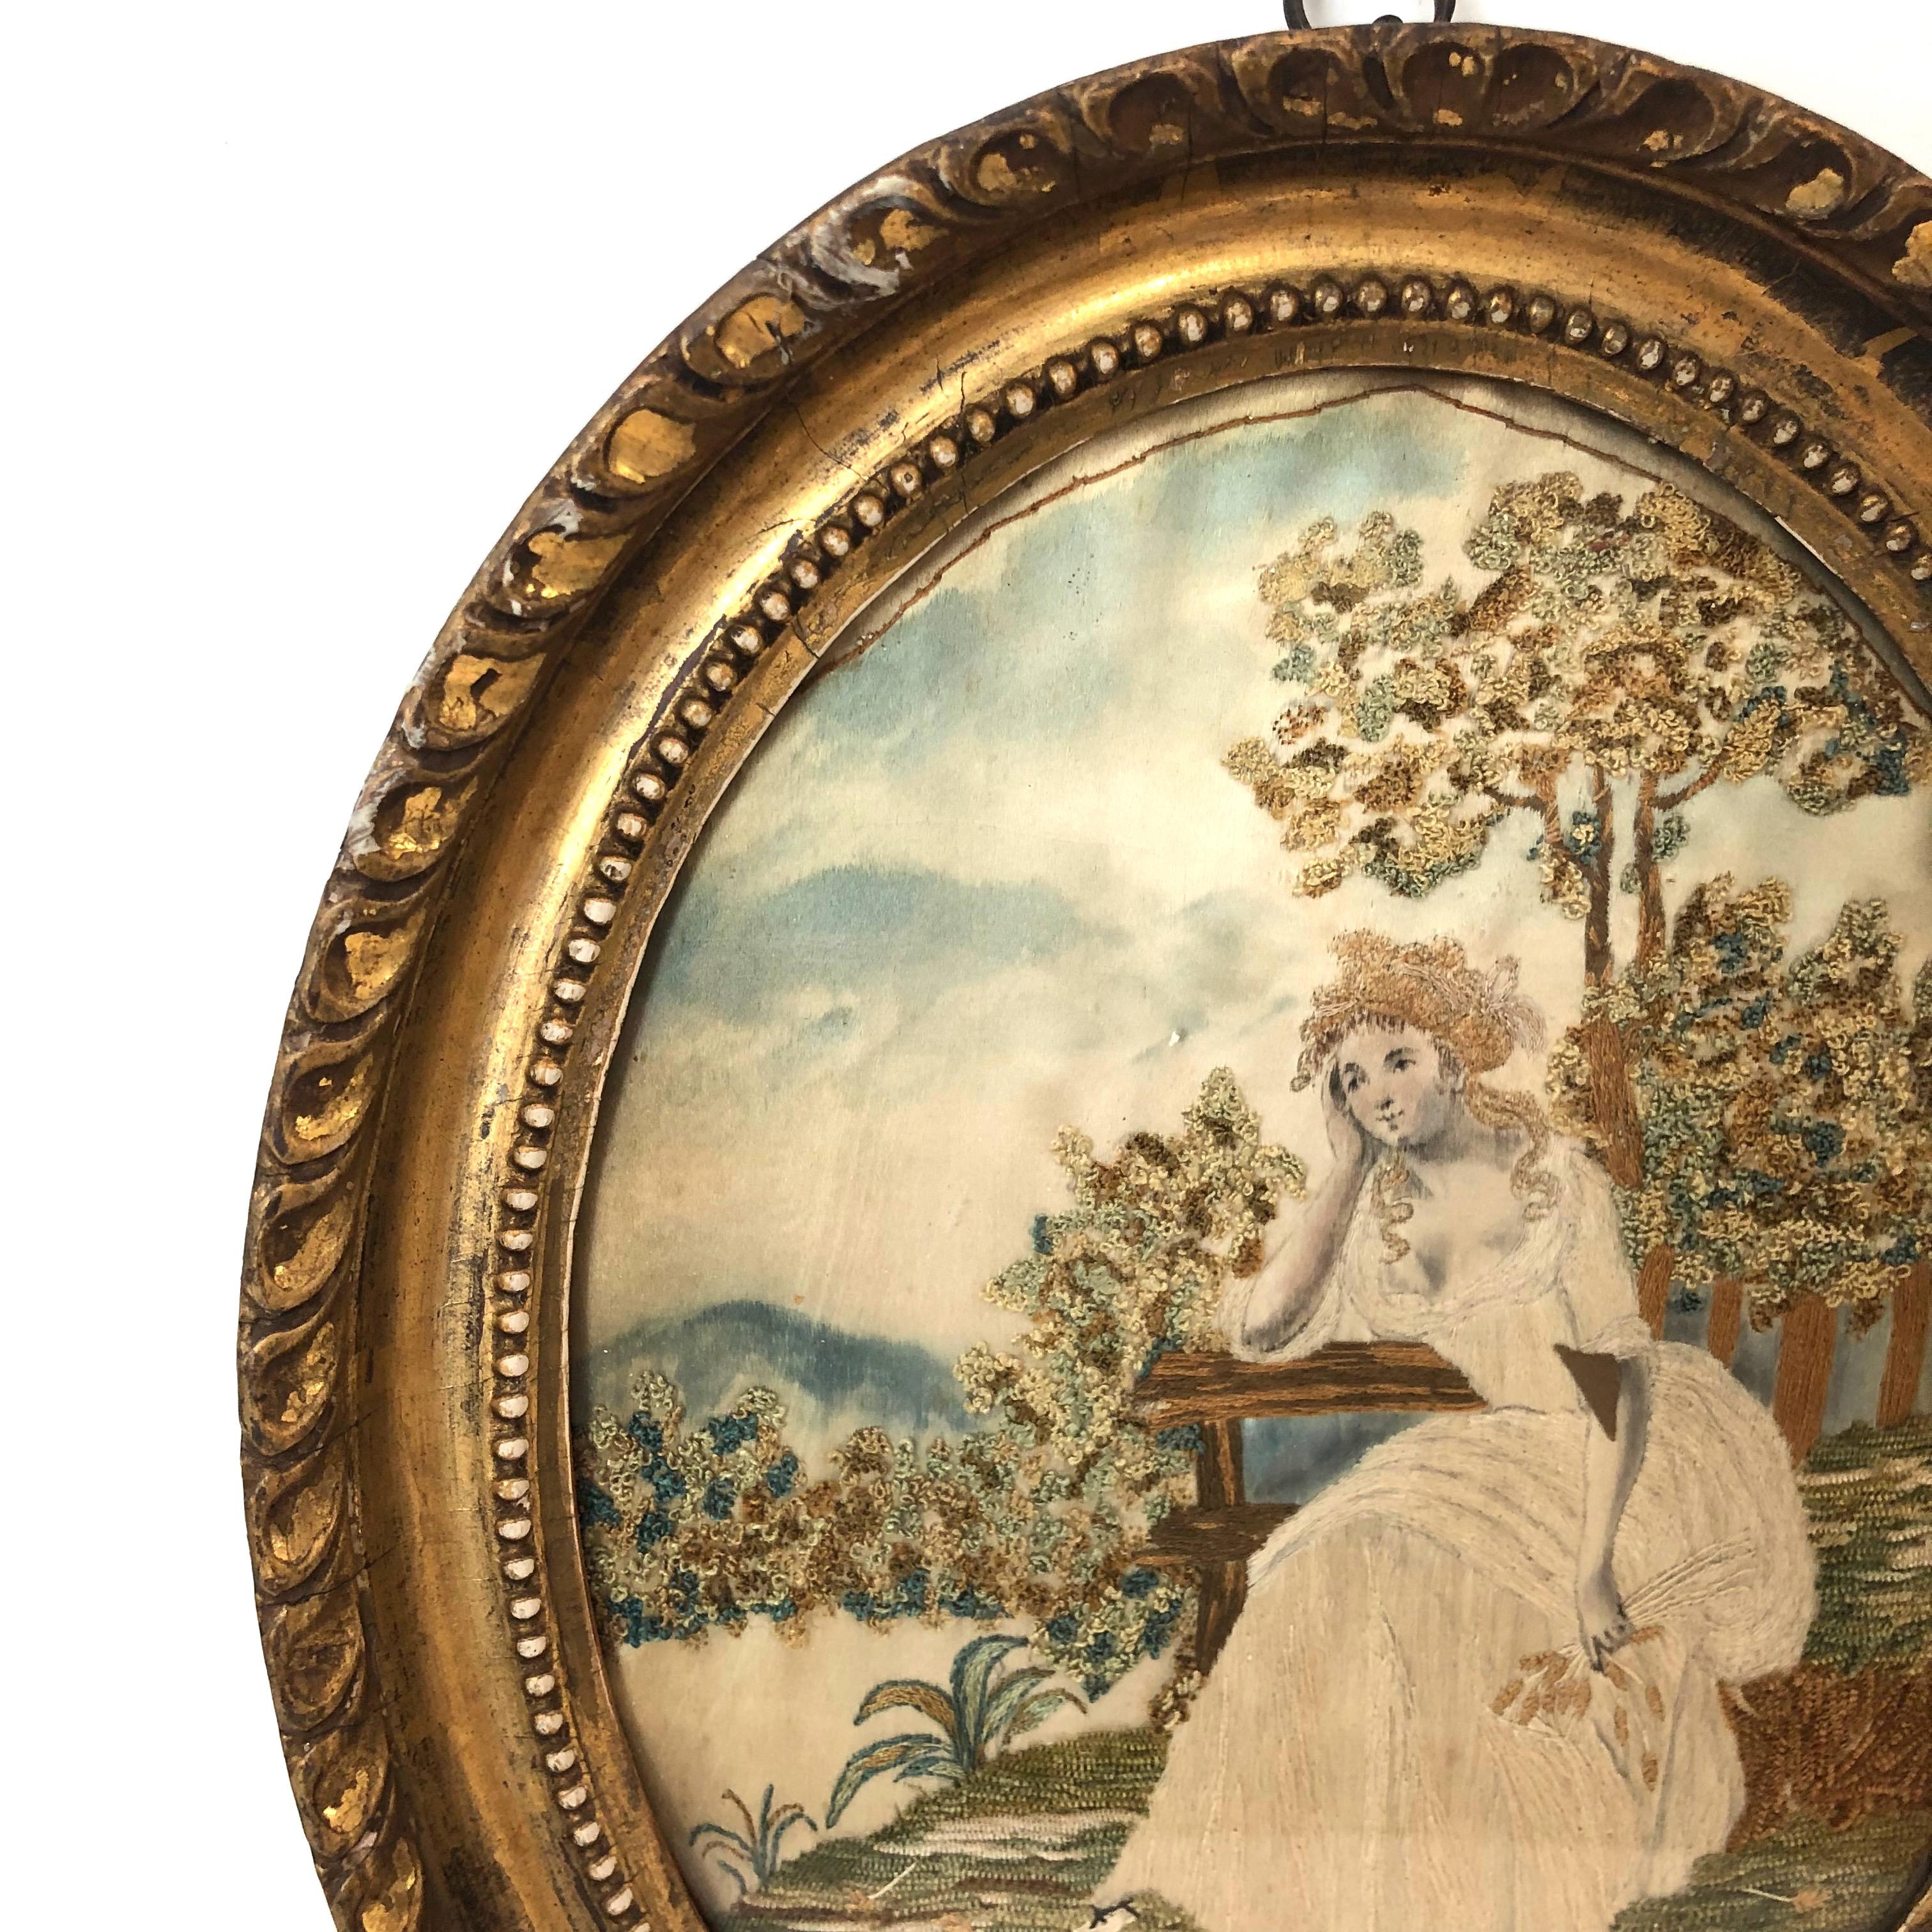 First quarter of the 19th century oval antique framed silk embroidery of sitting woman,
circa 1800-1820. Original frame.